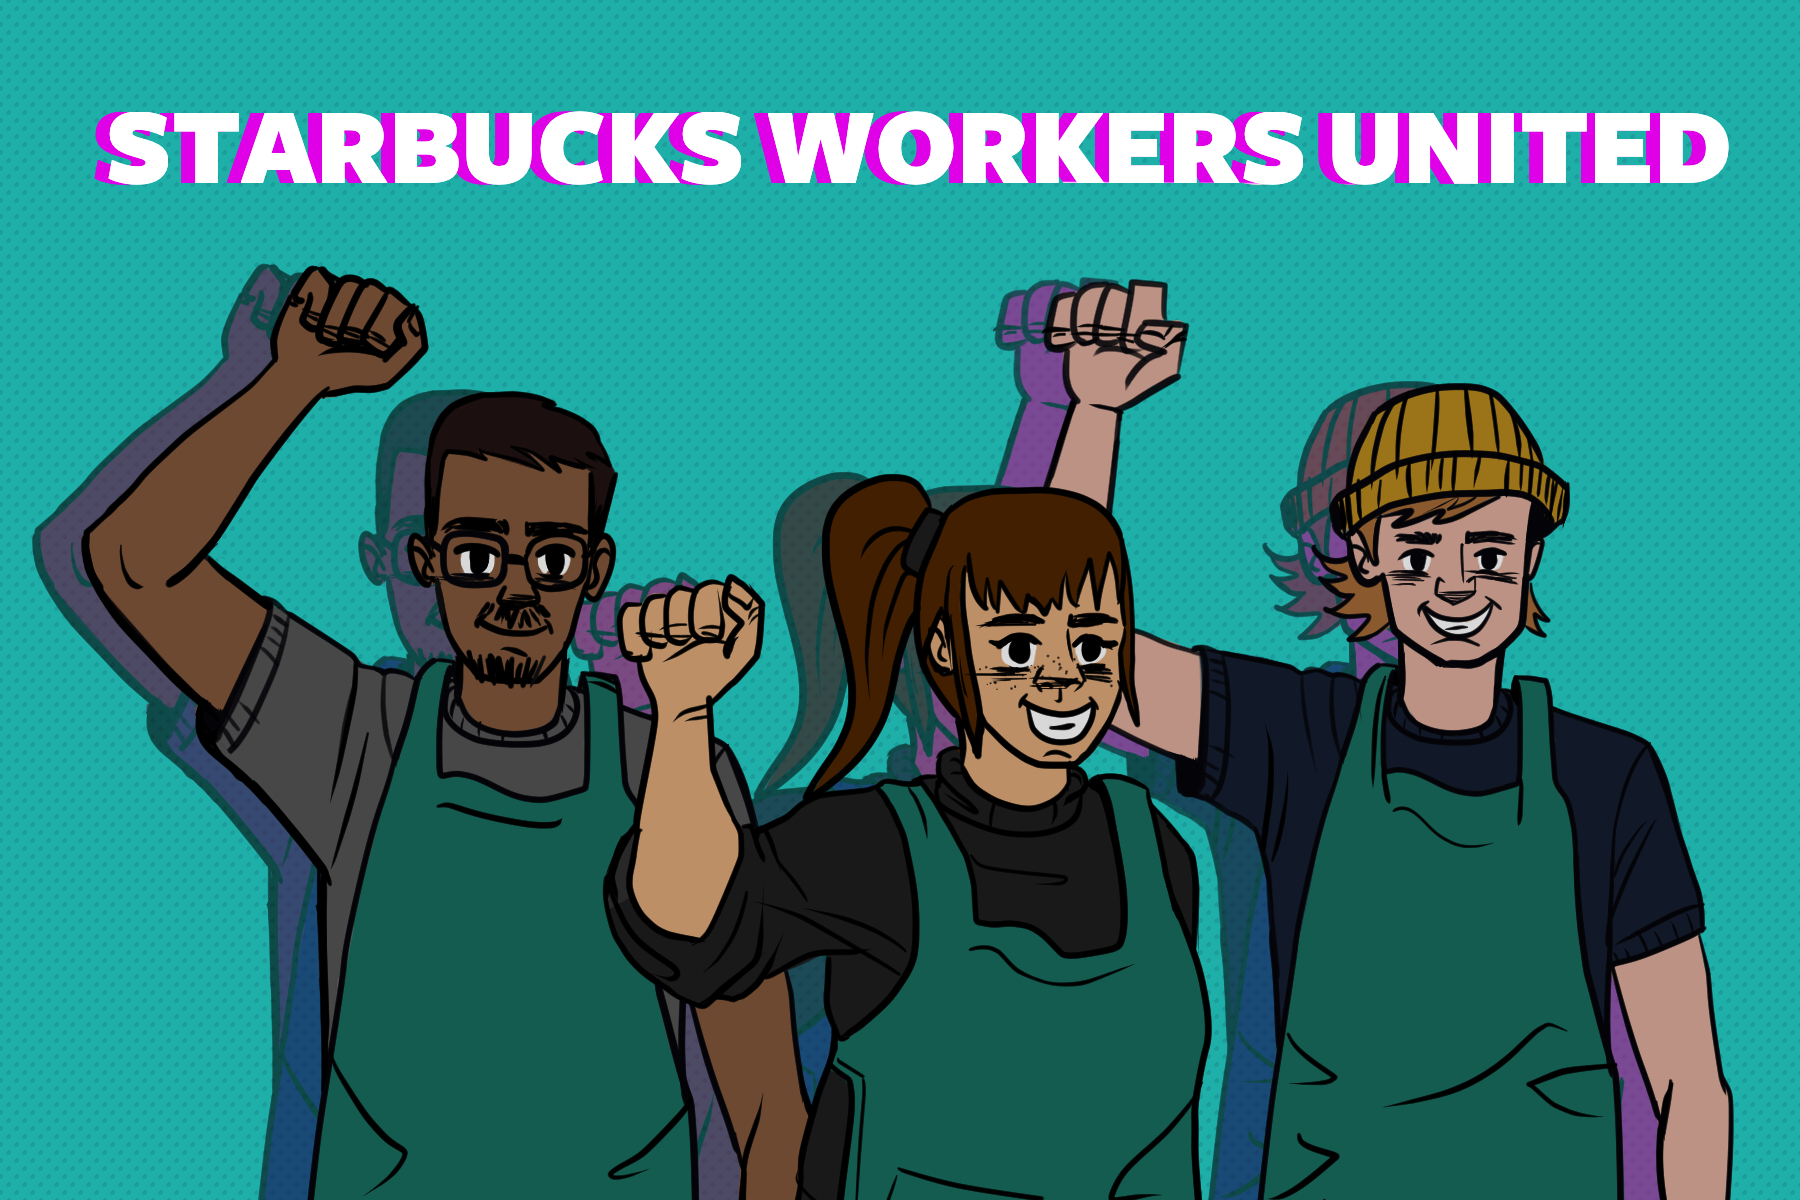 an illustration of workers in the Starbucks Workers Union